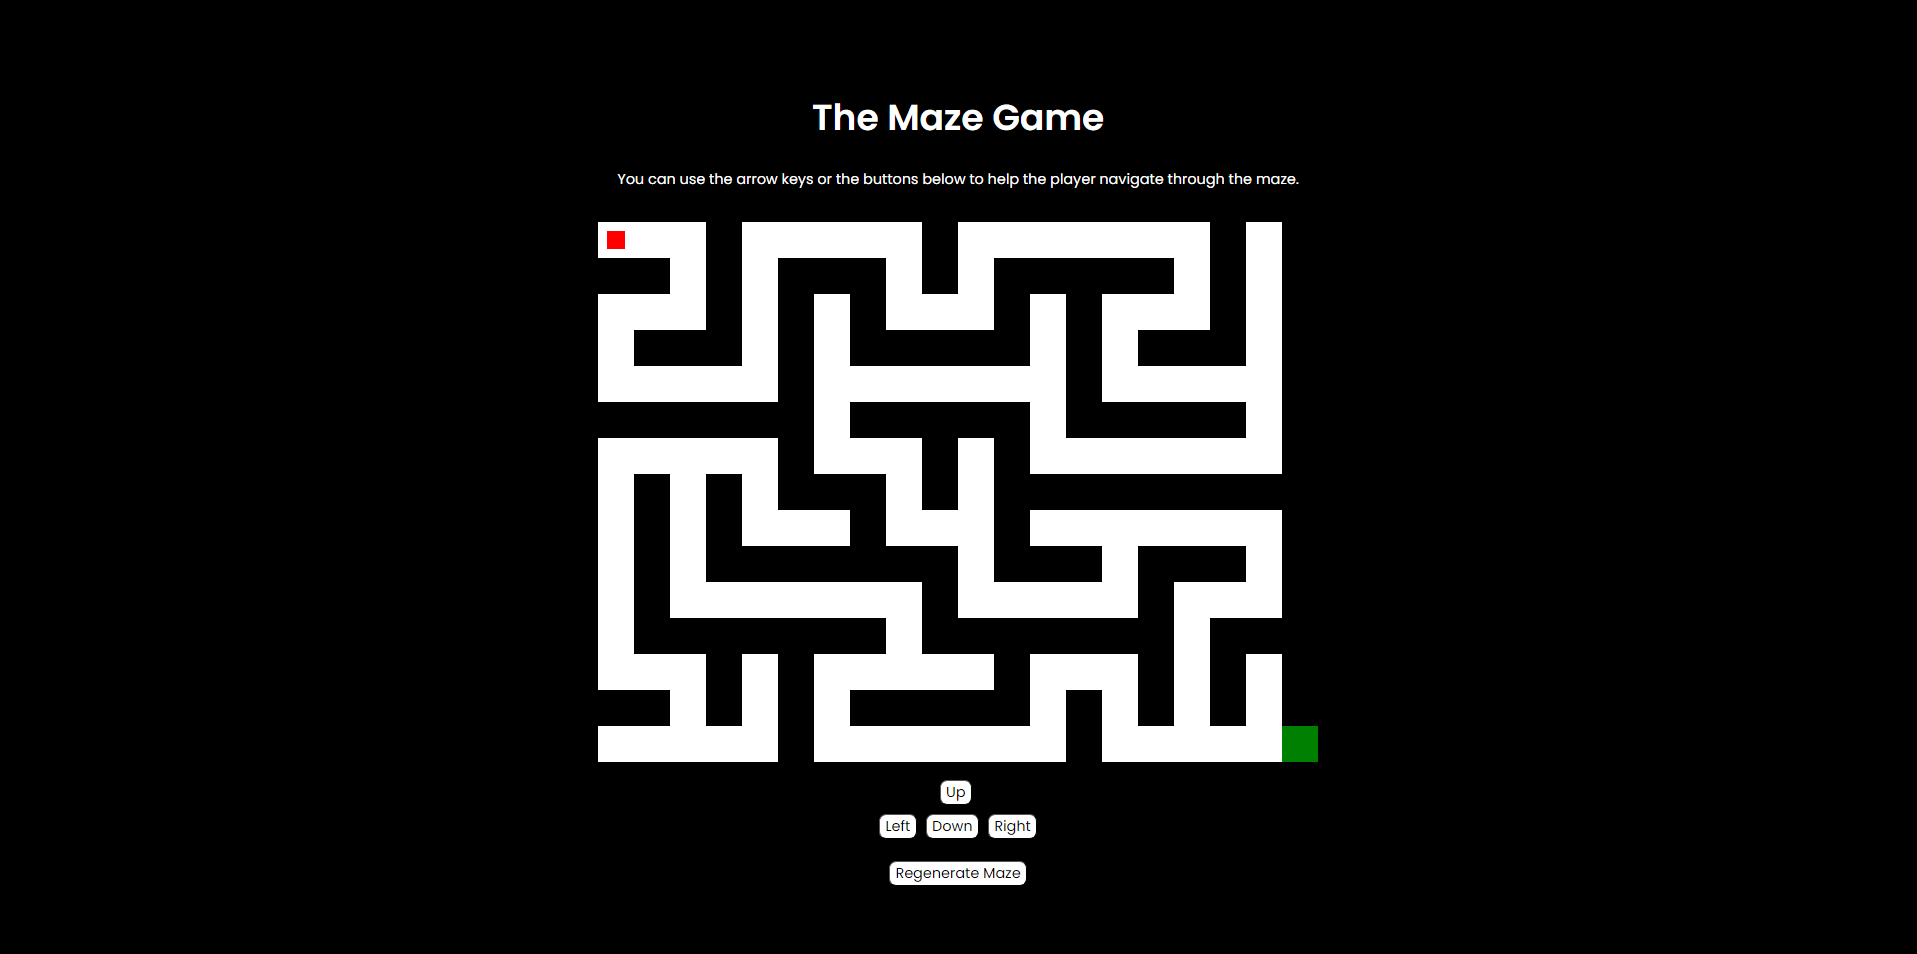 The Maze Game's UI